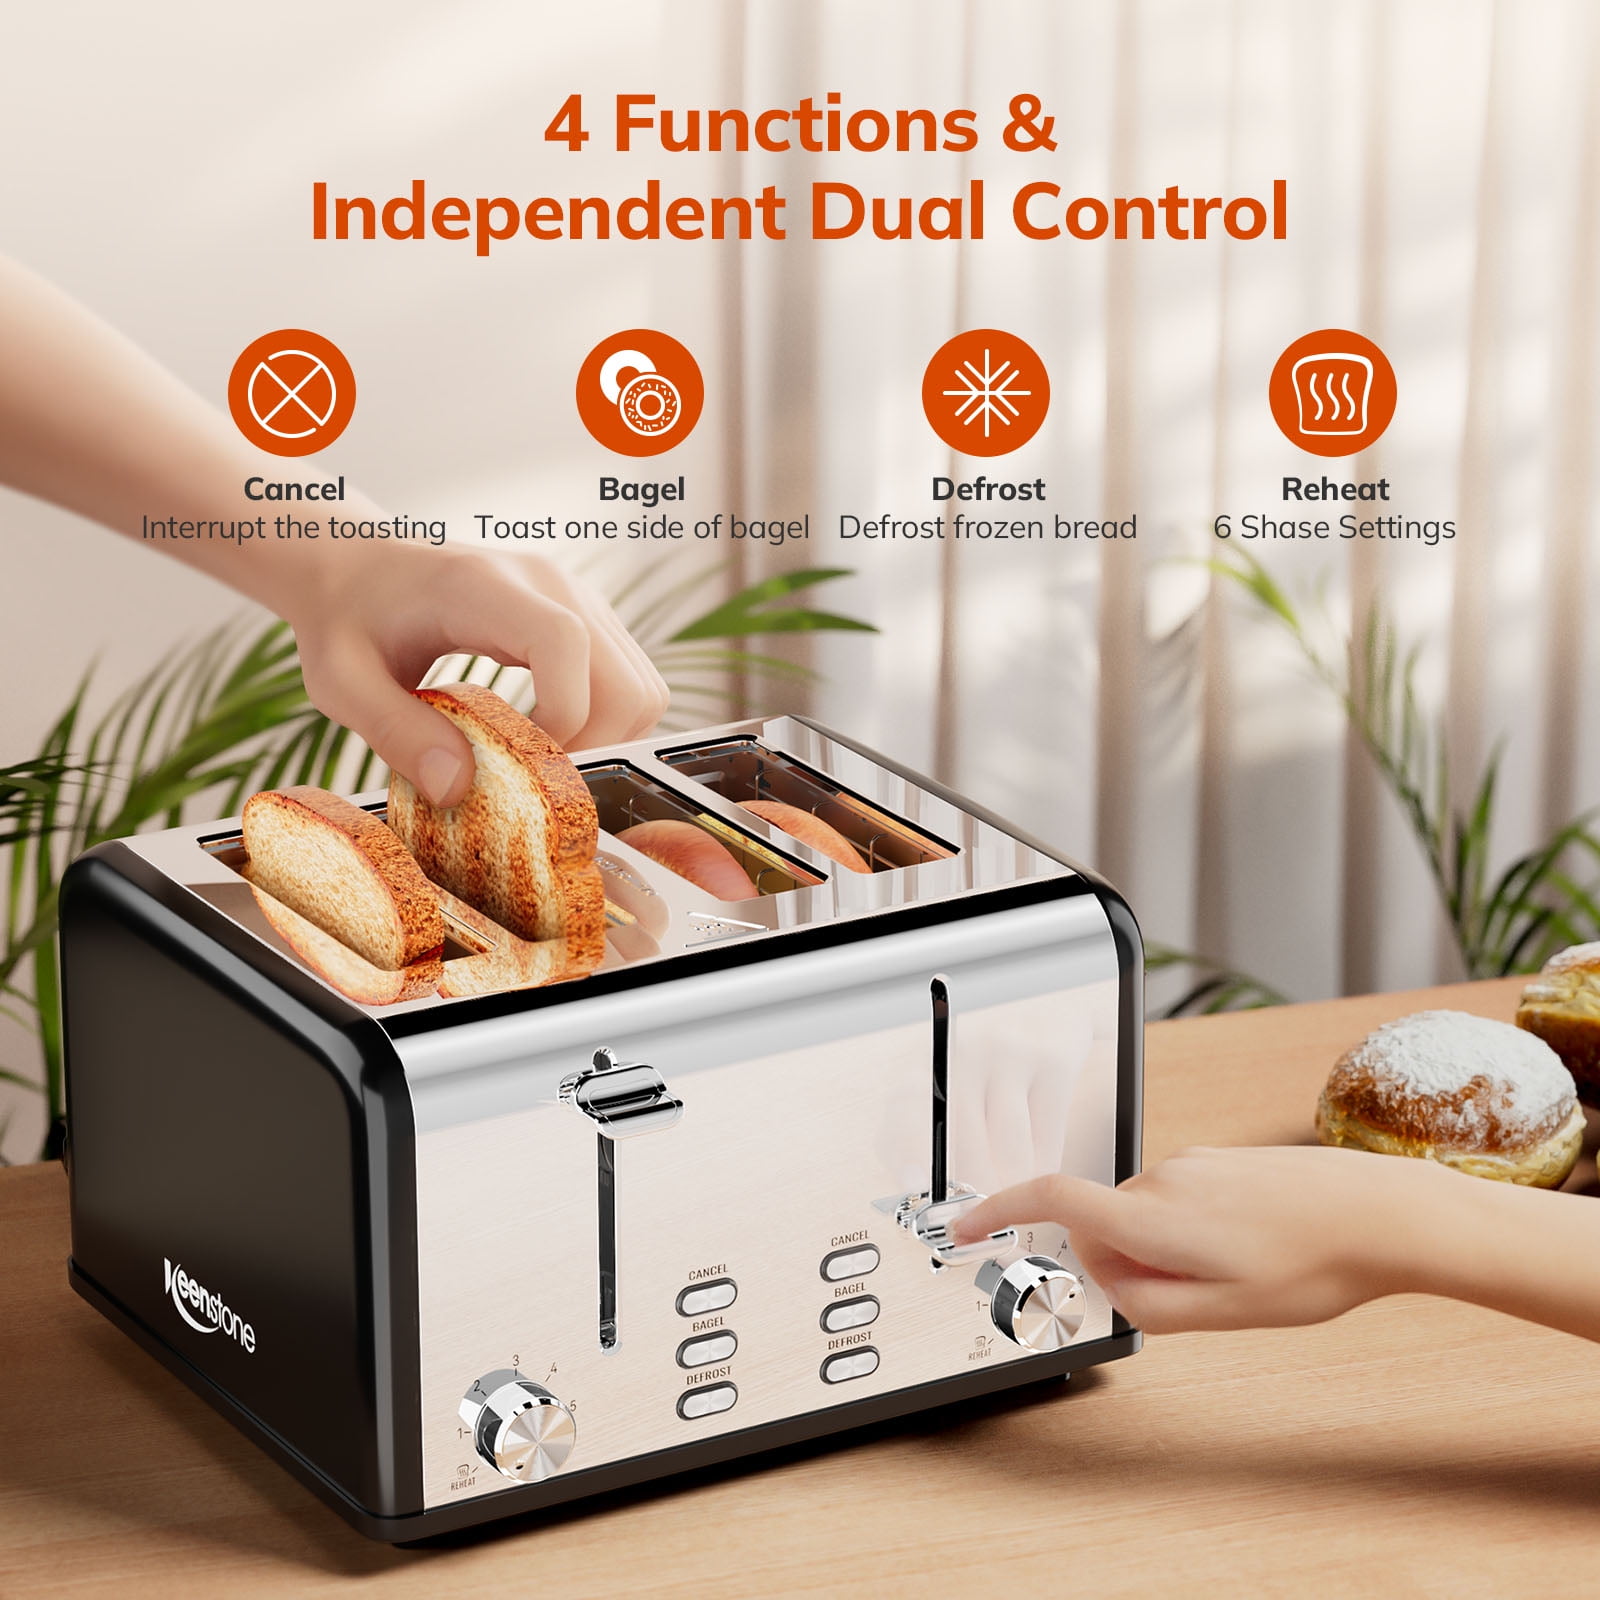 Toaster 2 Slice, Keenstone Stainless Steel Retro Toaster with Timer, Wide  Slot, Defrost/Reheat/Cancel Fuction, Removable Crumb Tray, Blue